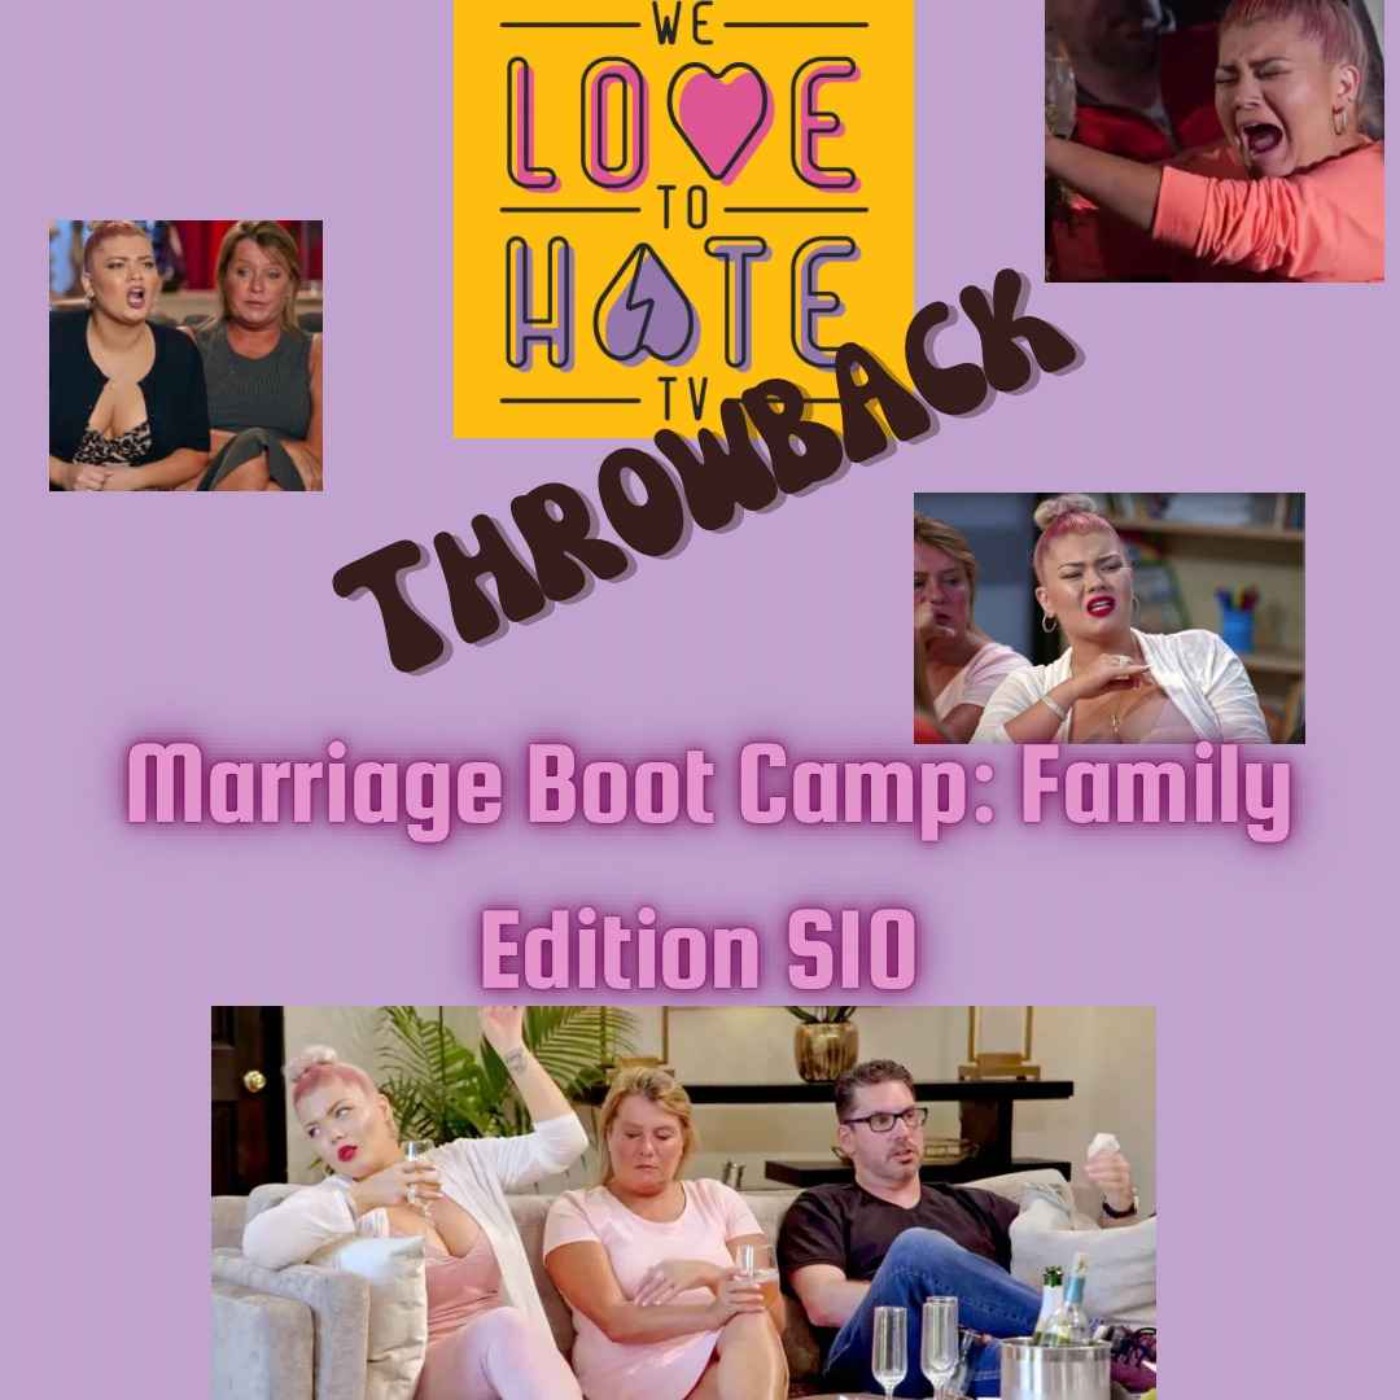 Marriage Bootcamp Family Edition S10E4 *THROWBACK*